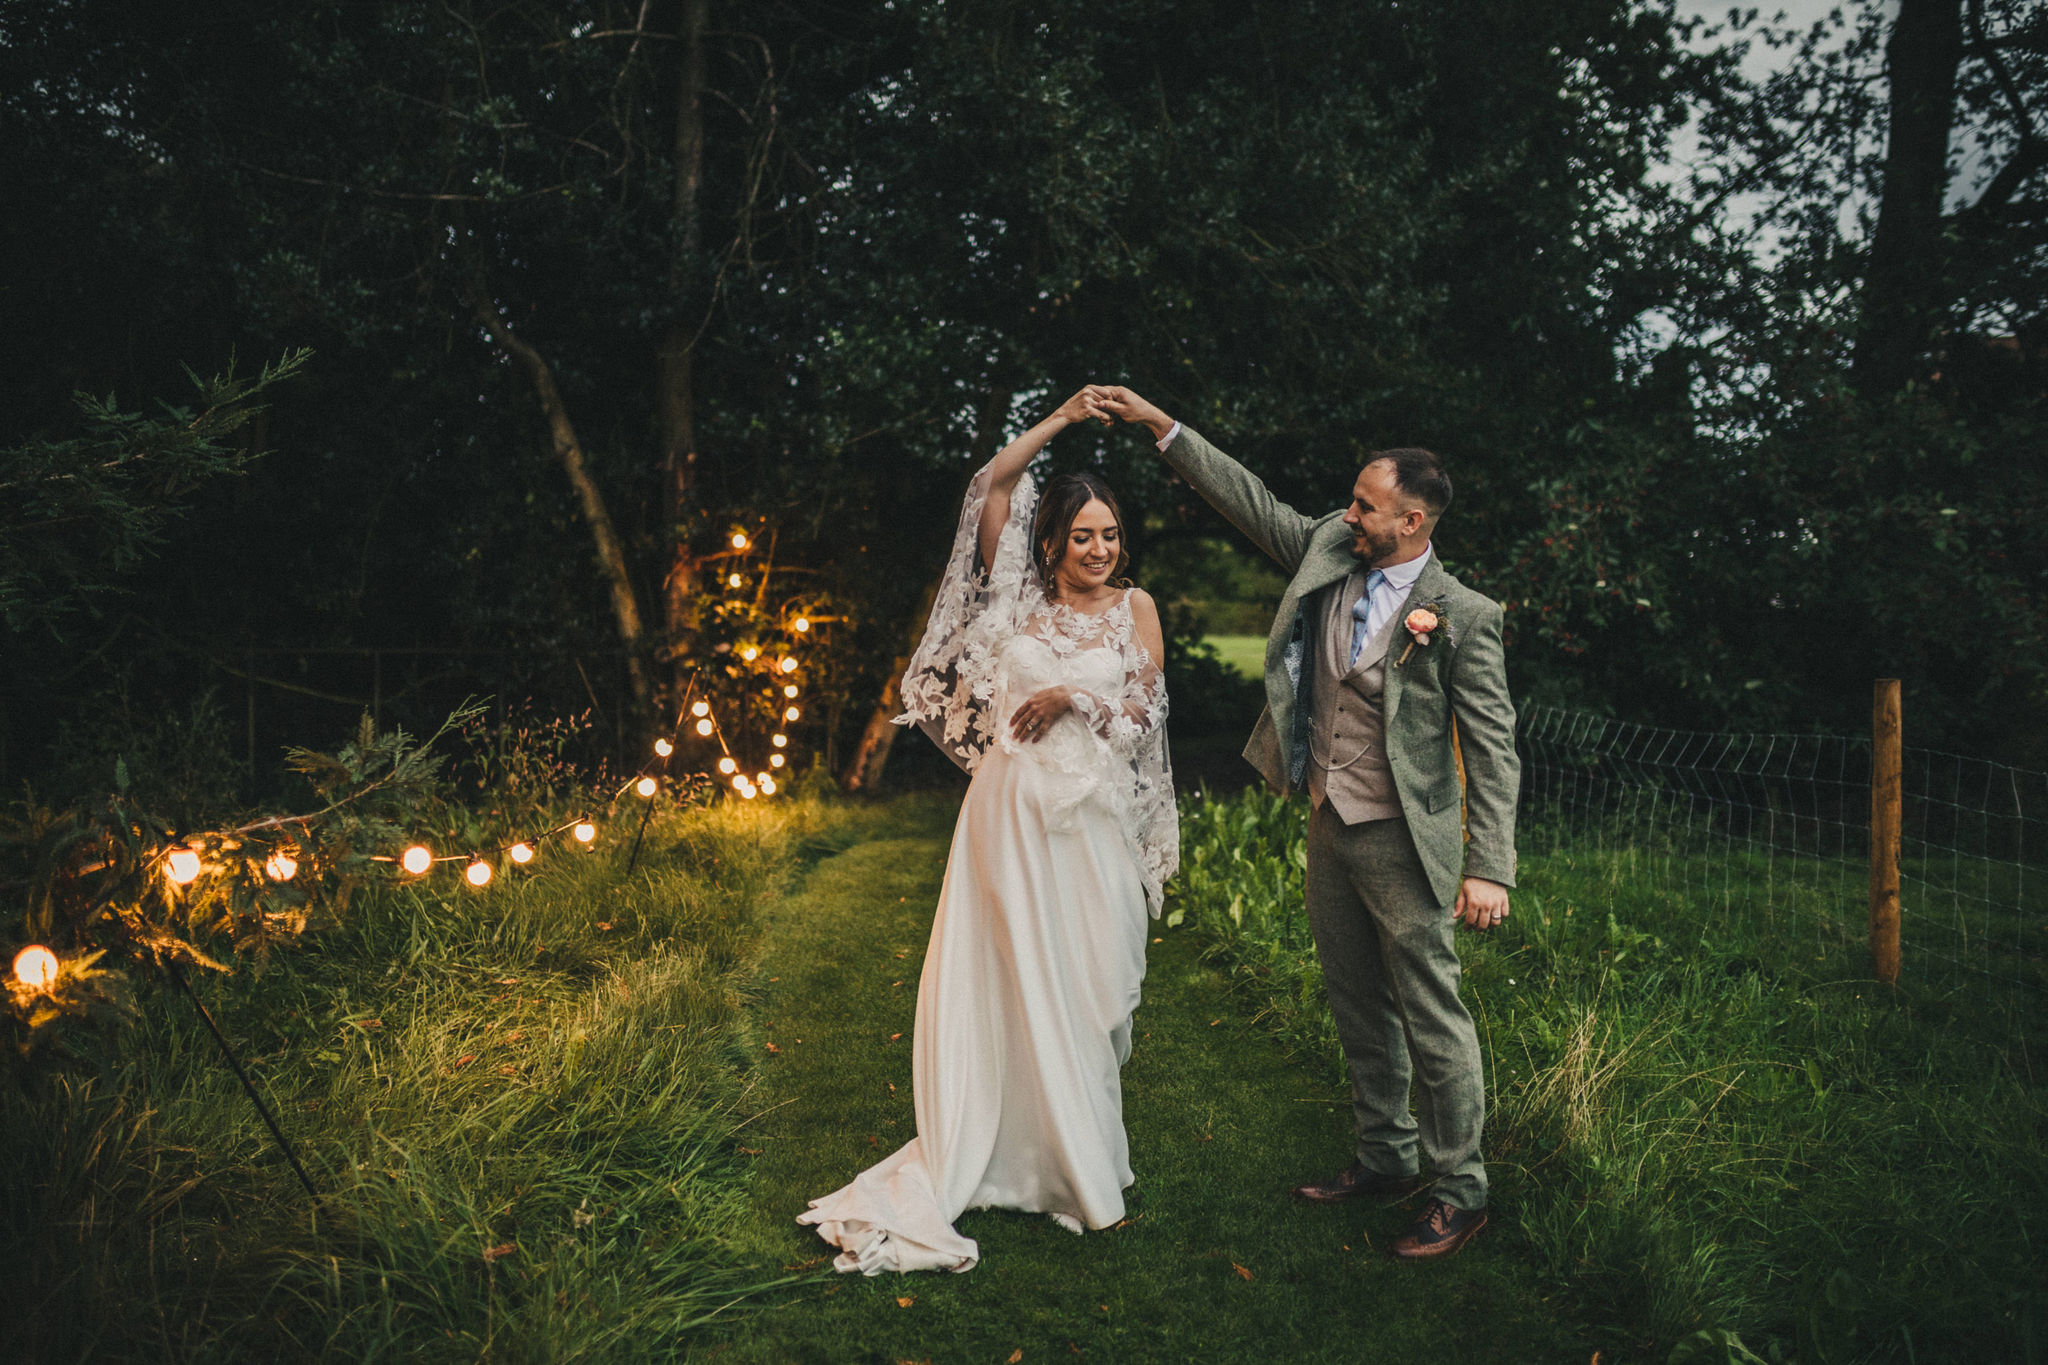 A bride and groom dance on the grass under the shade of a large pine tree at dusk lit up by festoon lights looped along a mown path